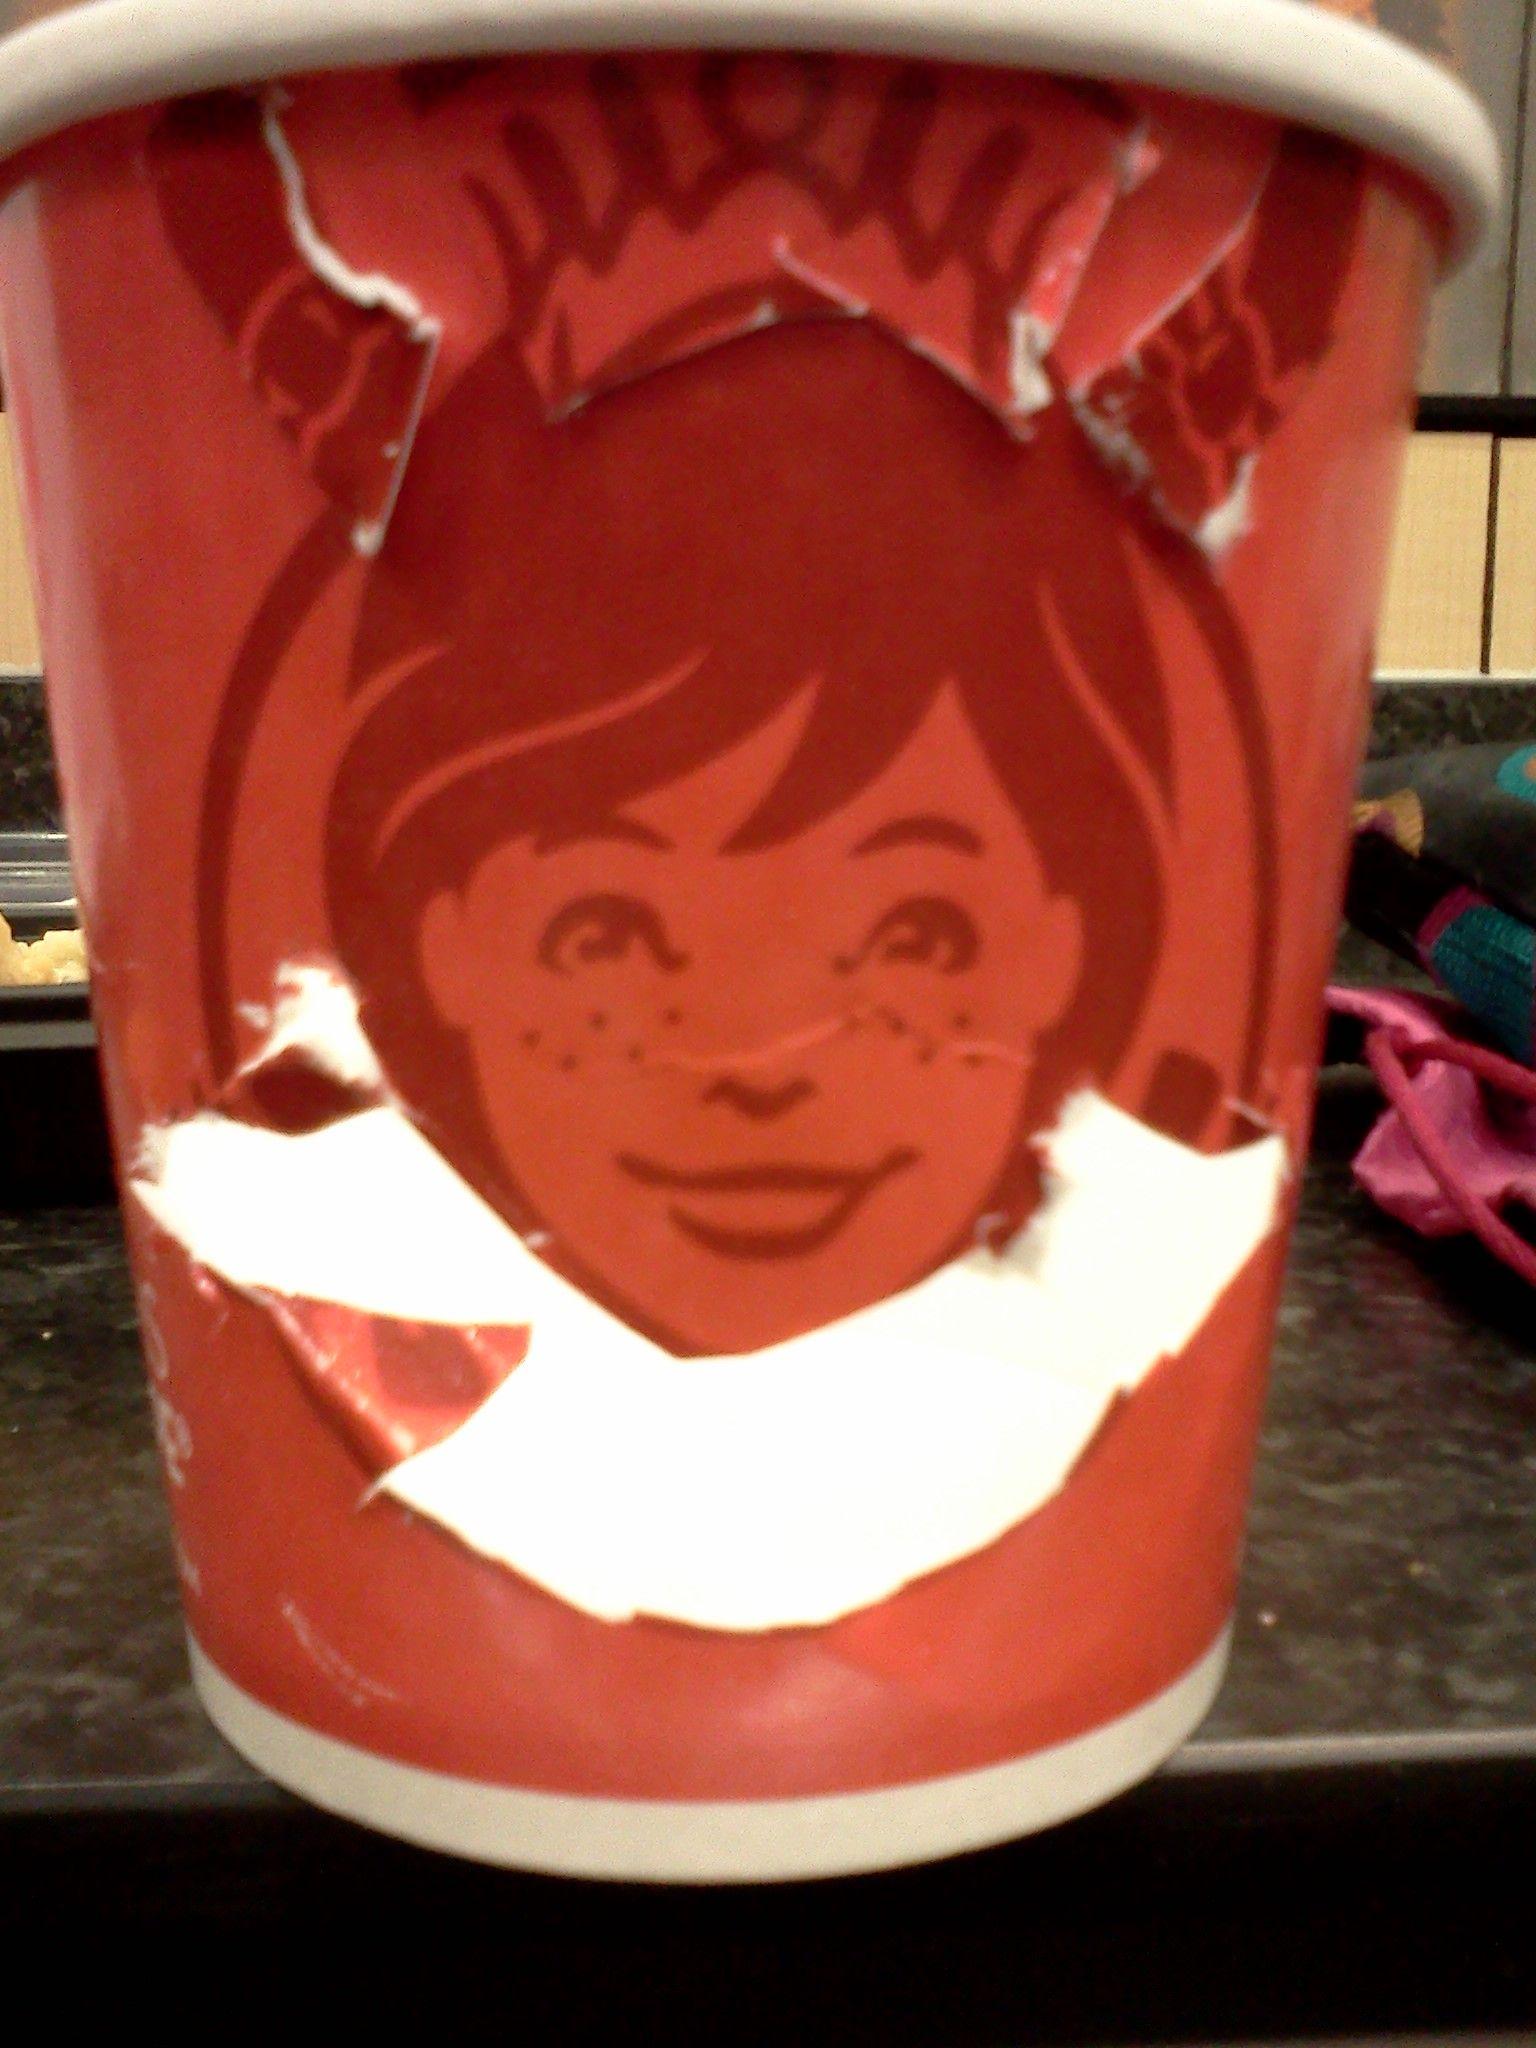 New Wendy's Logo - You Are Being Brainwashed 1 The New WENDY'S Logo Is Inverse Satanic